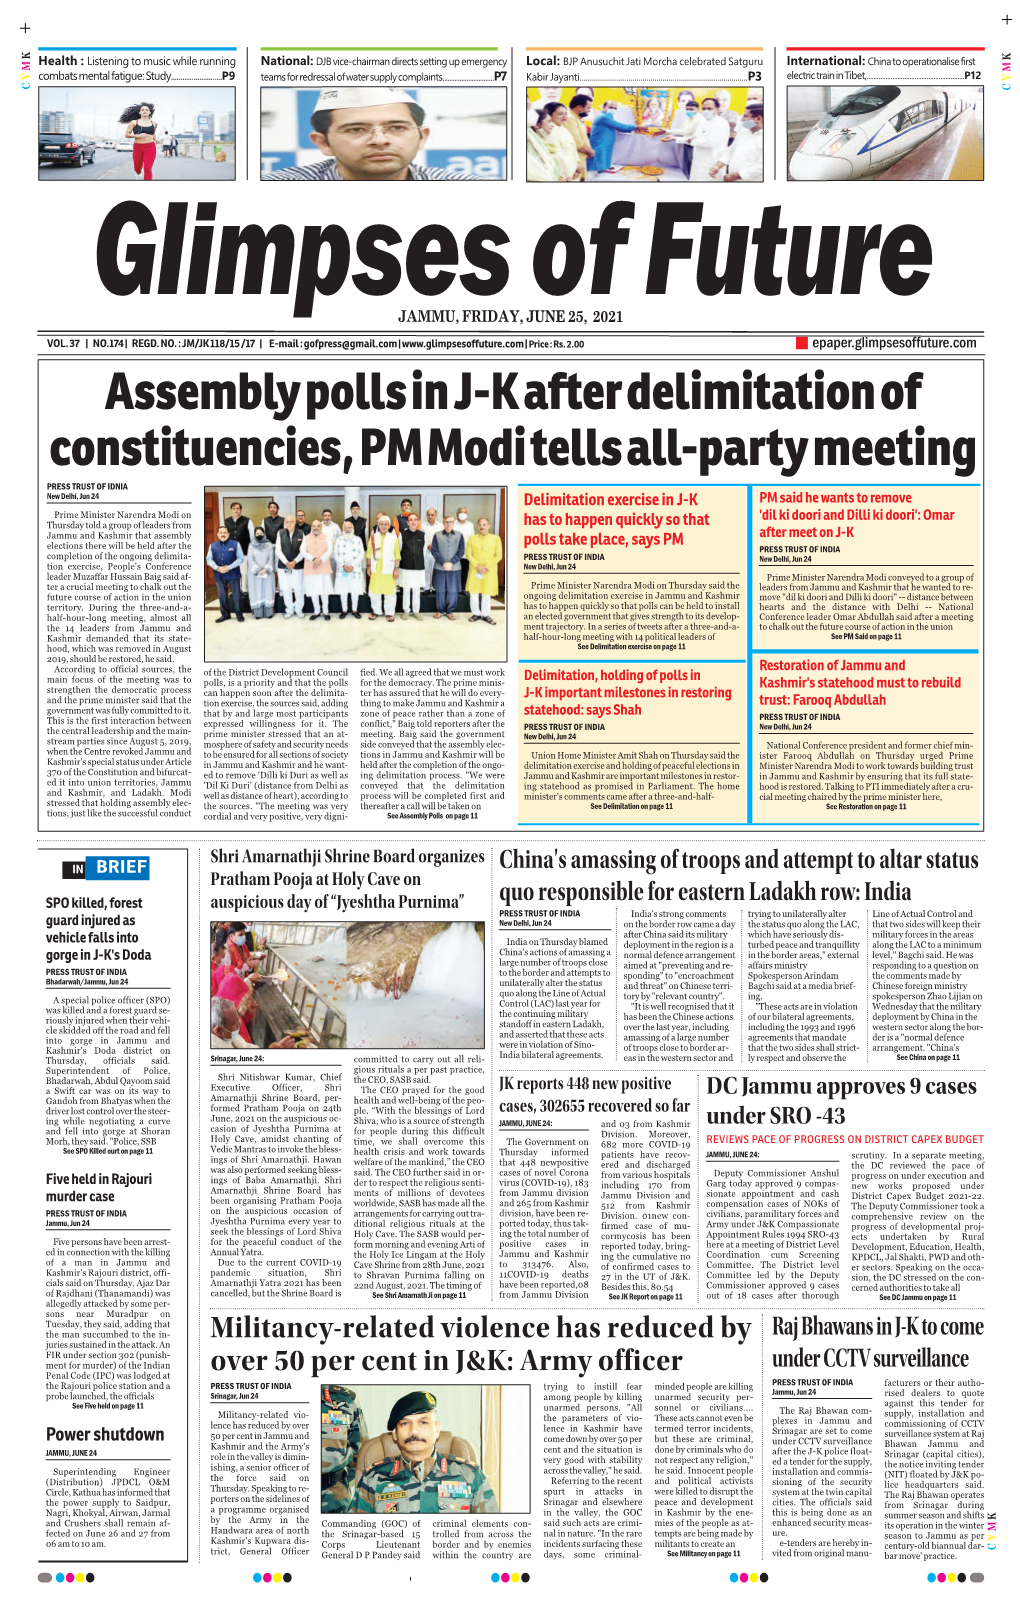 Assembly Polls in J-K After Delimitation of Constituencies, PM Modi Tells All